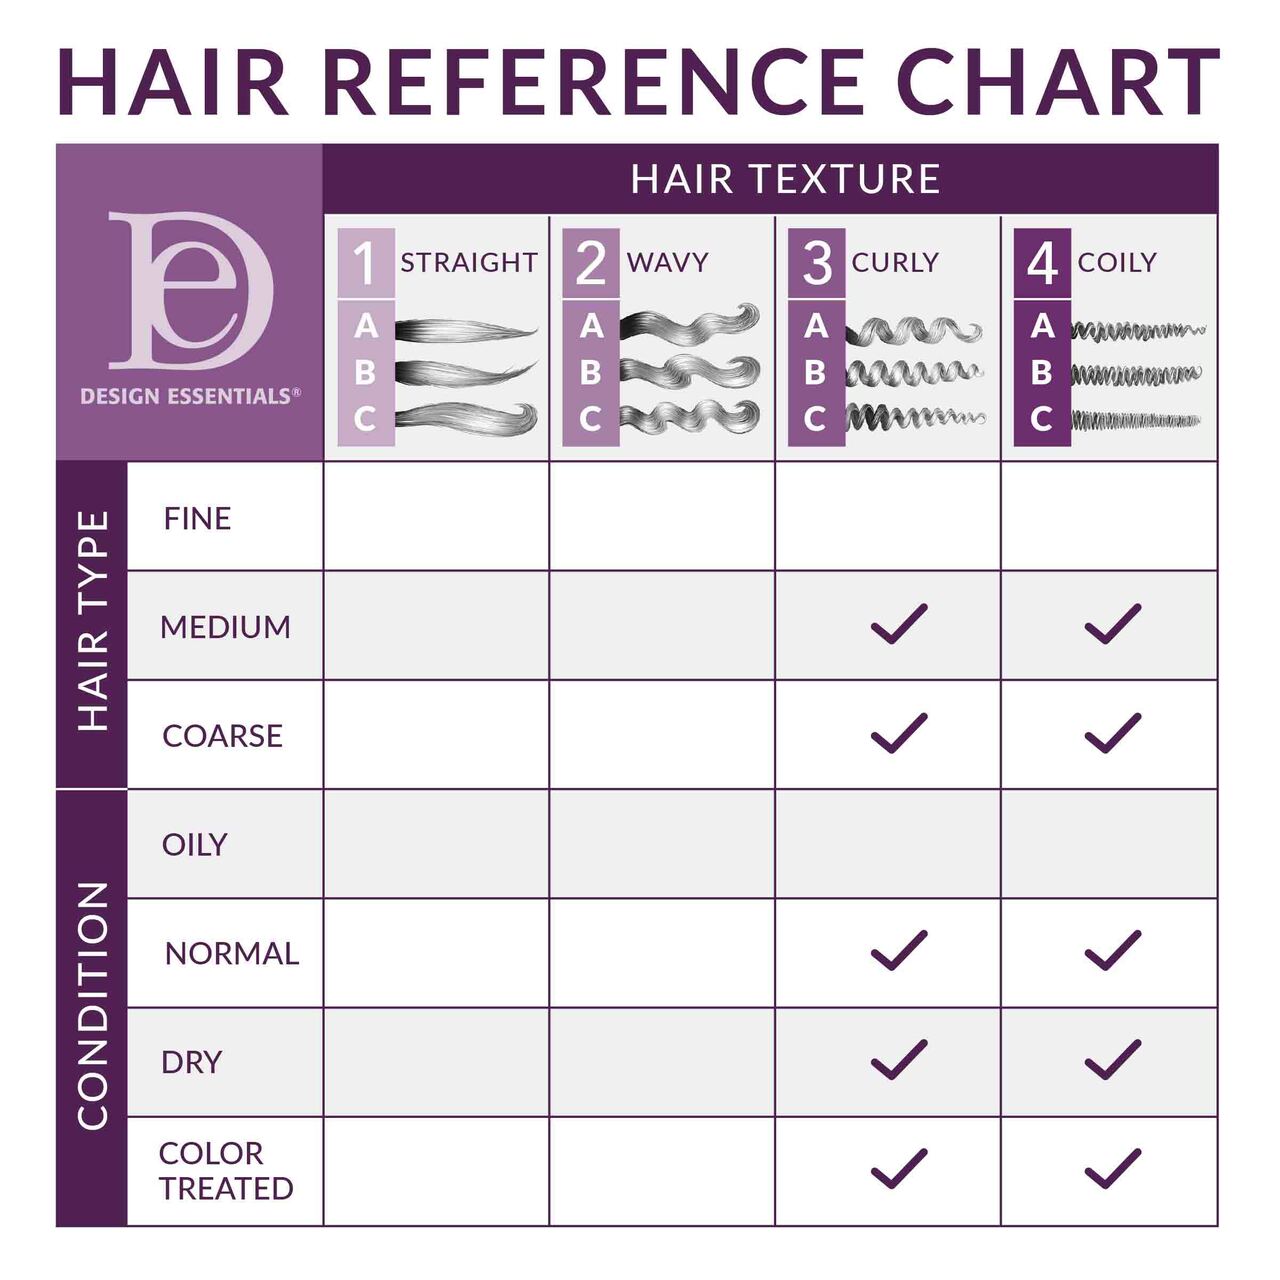 Honey_Curl_Forming_Custard_-_Hair_Reference_Chart__76952.1578656139